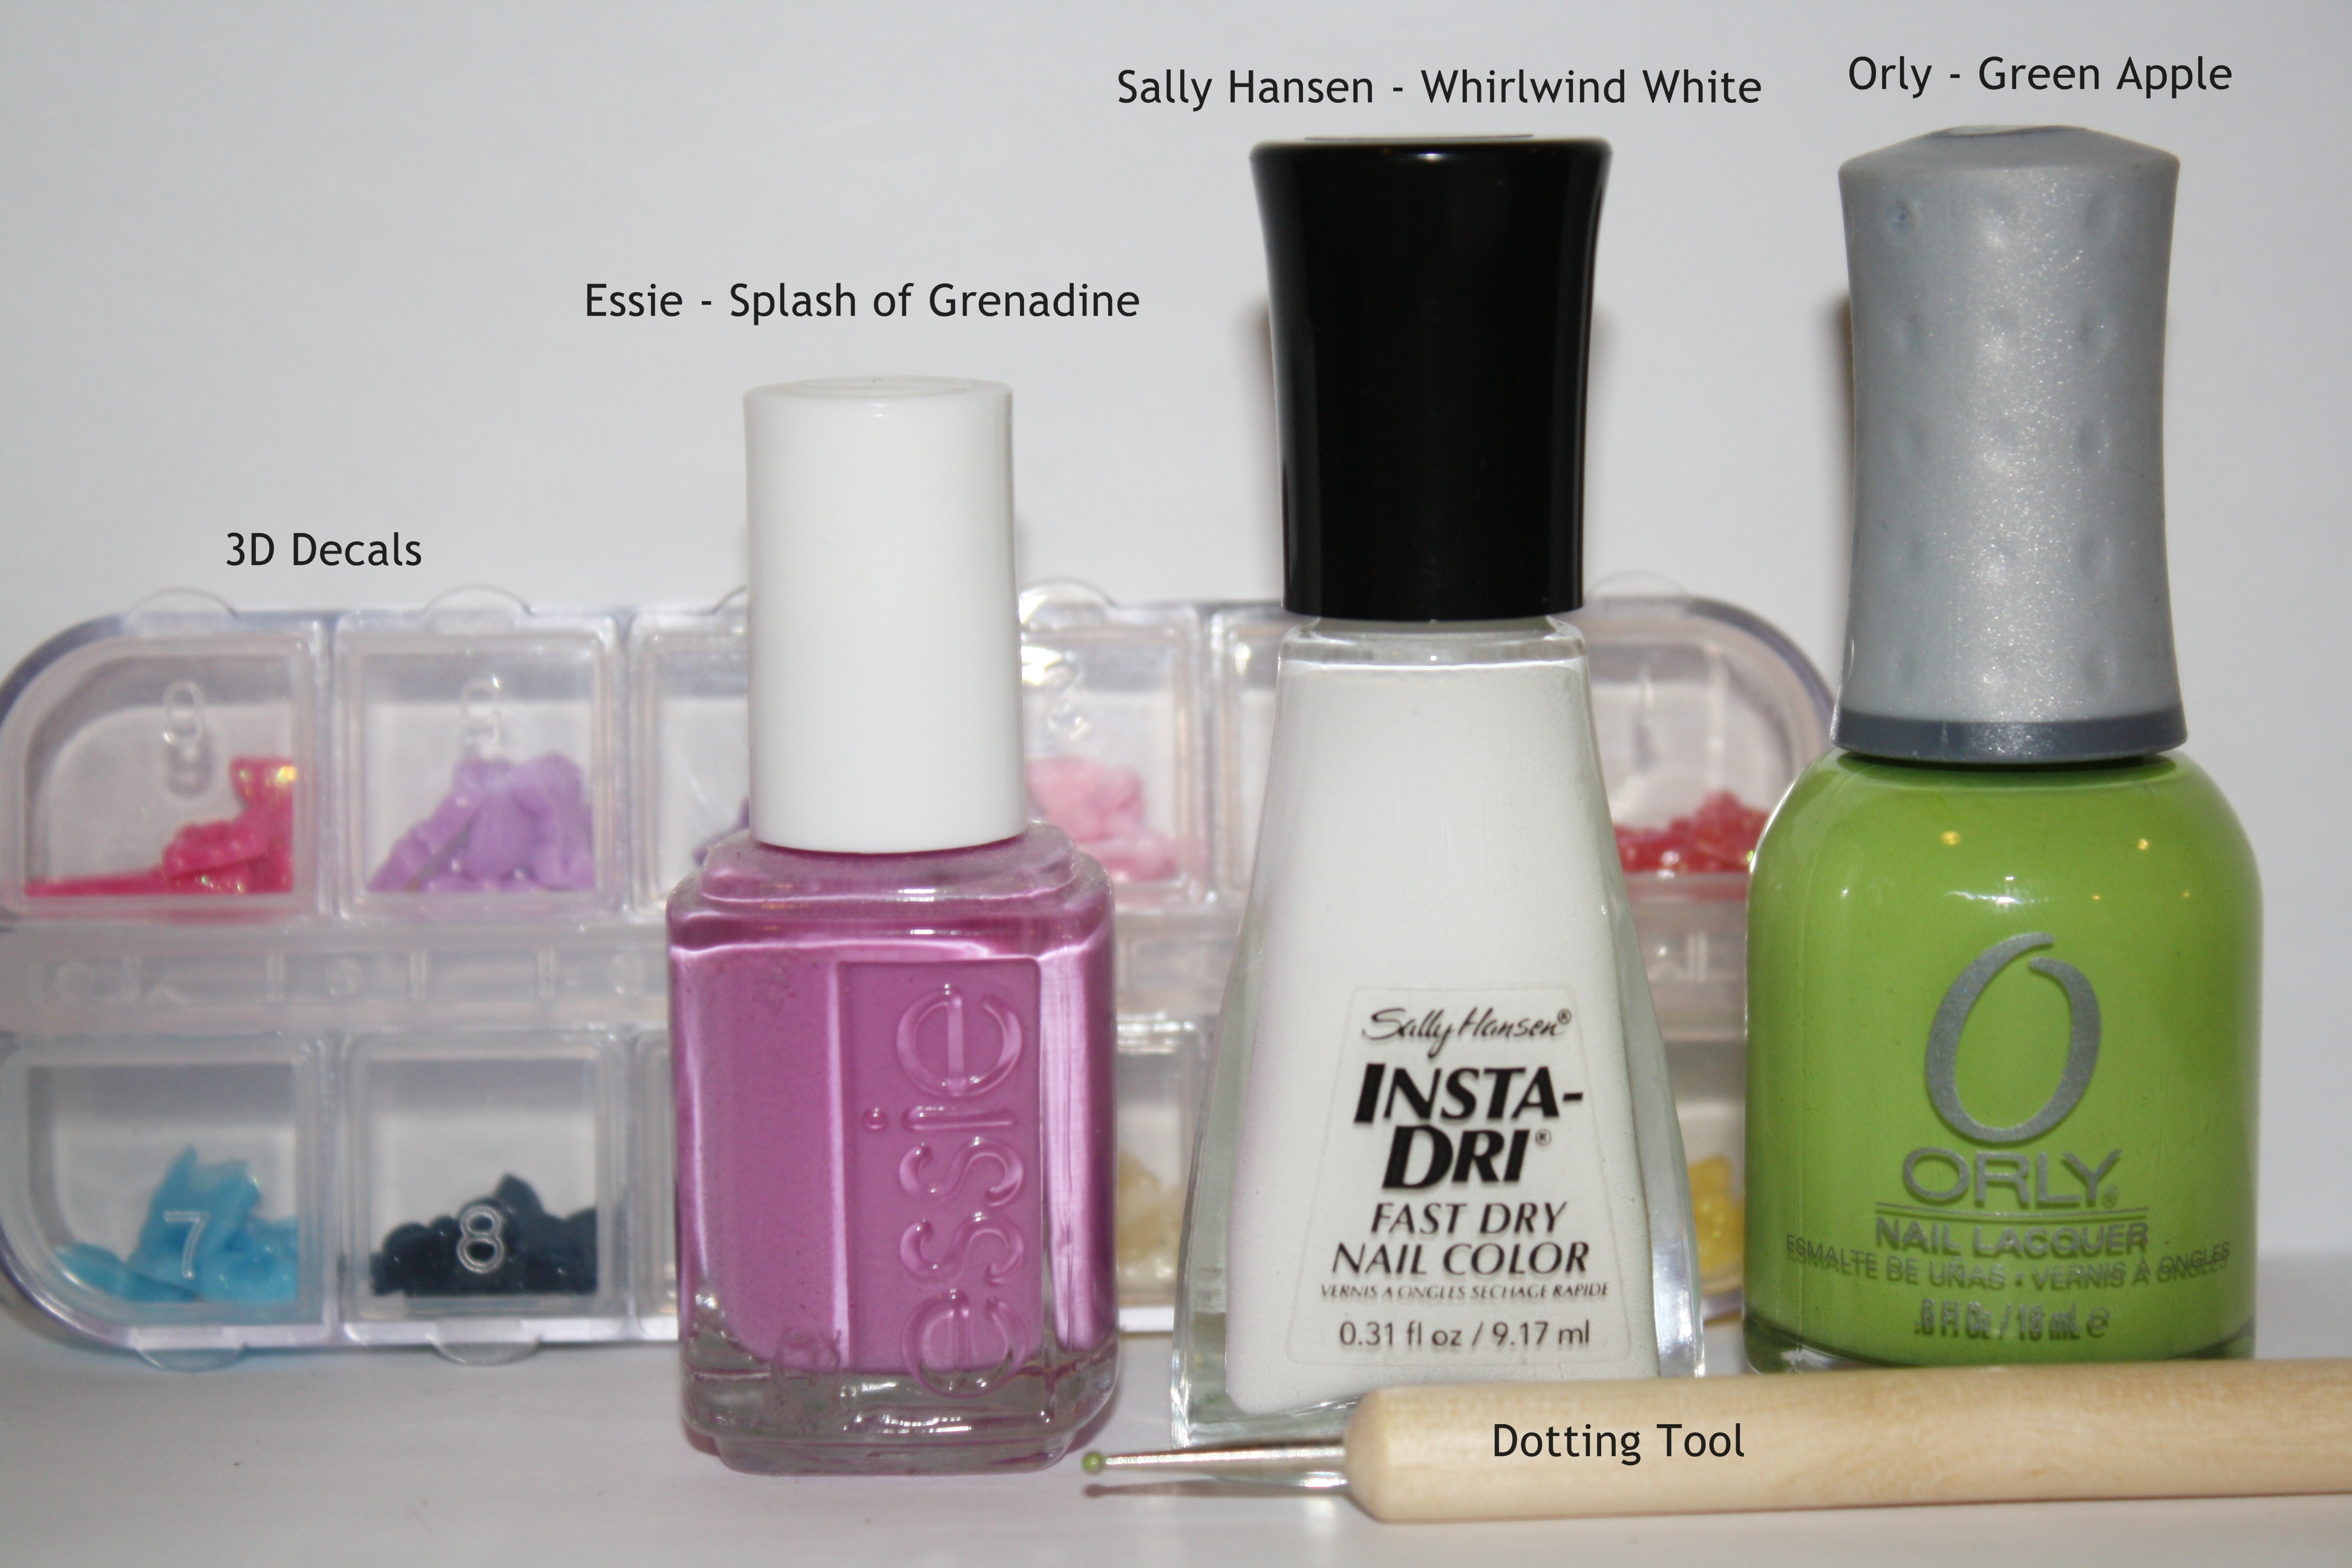 Place 3D bright green bows on the base of each nail while the polish is